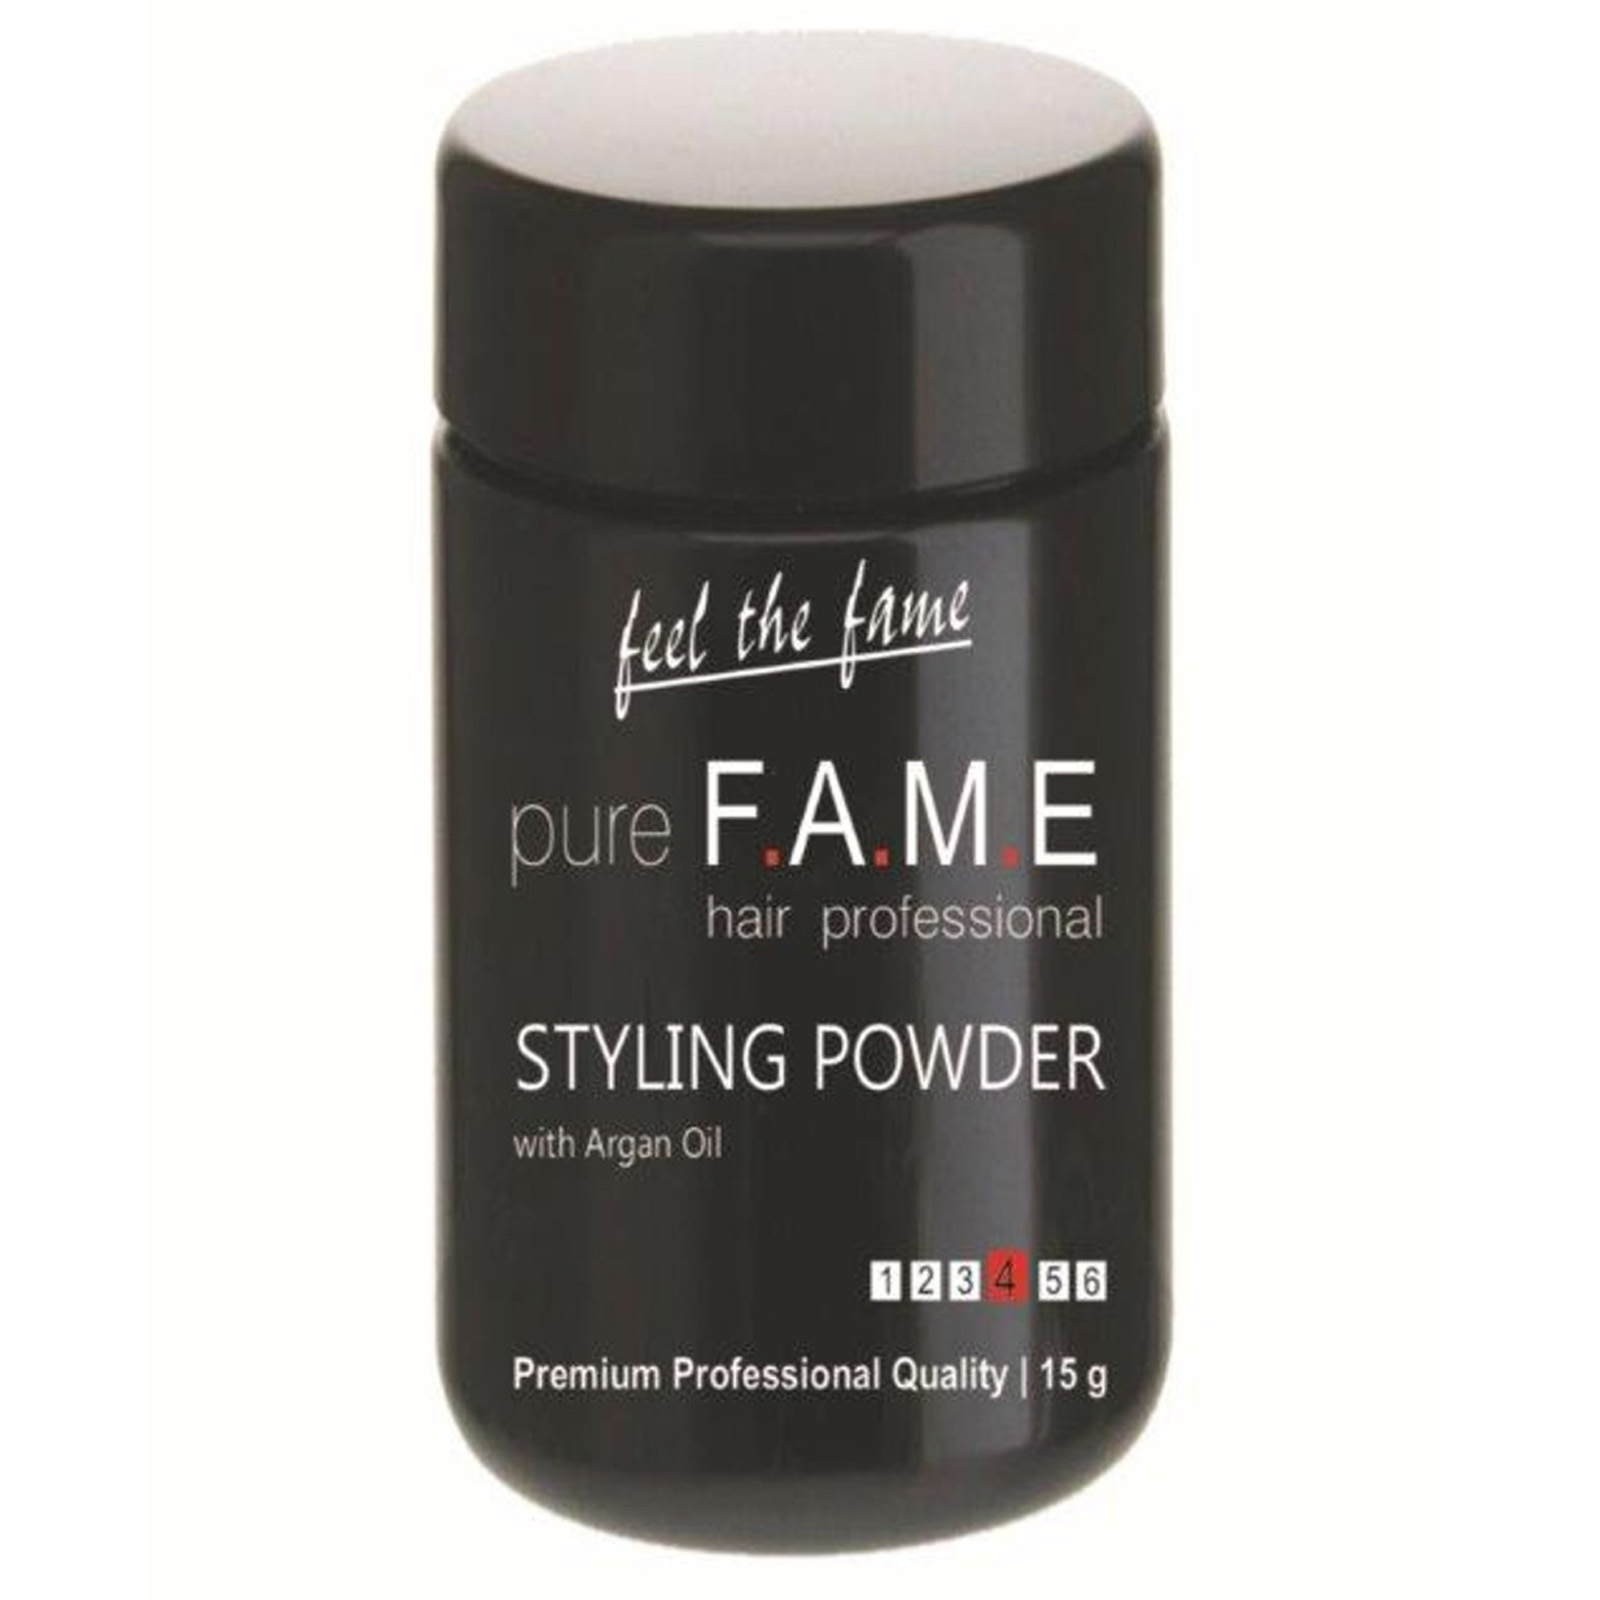 Pure FAME STYLING POWDER with Arganoil, 10 g